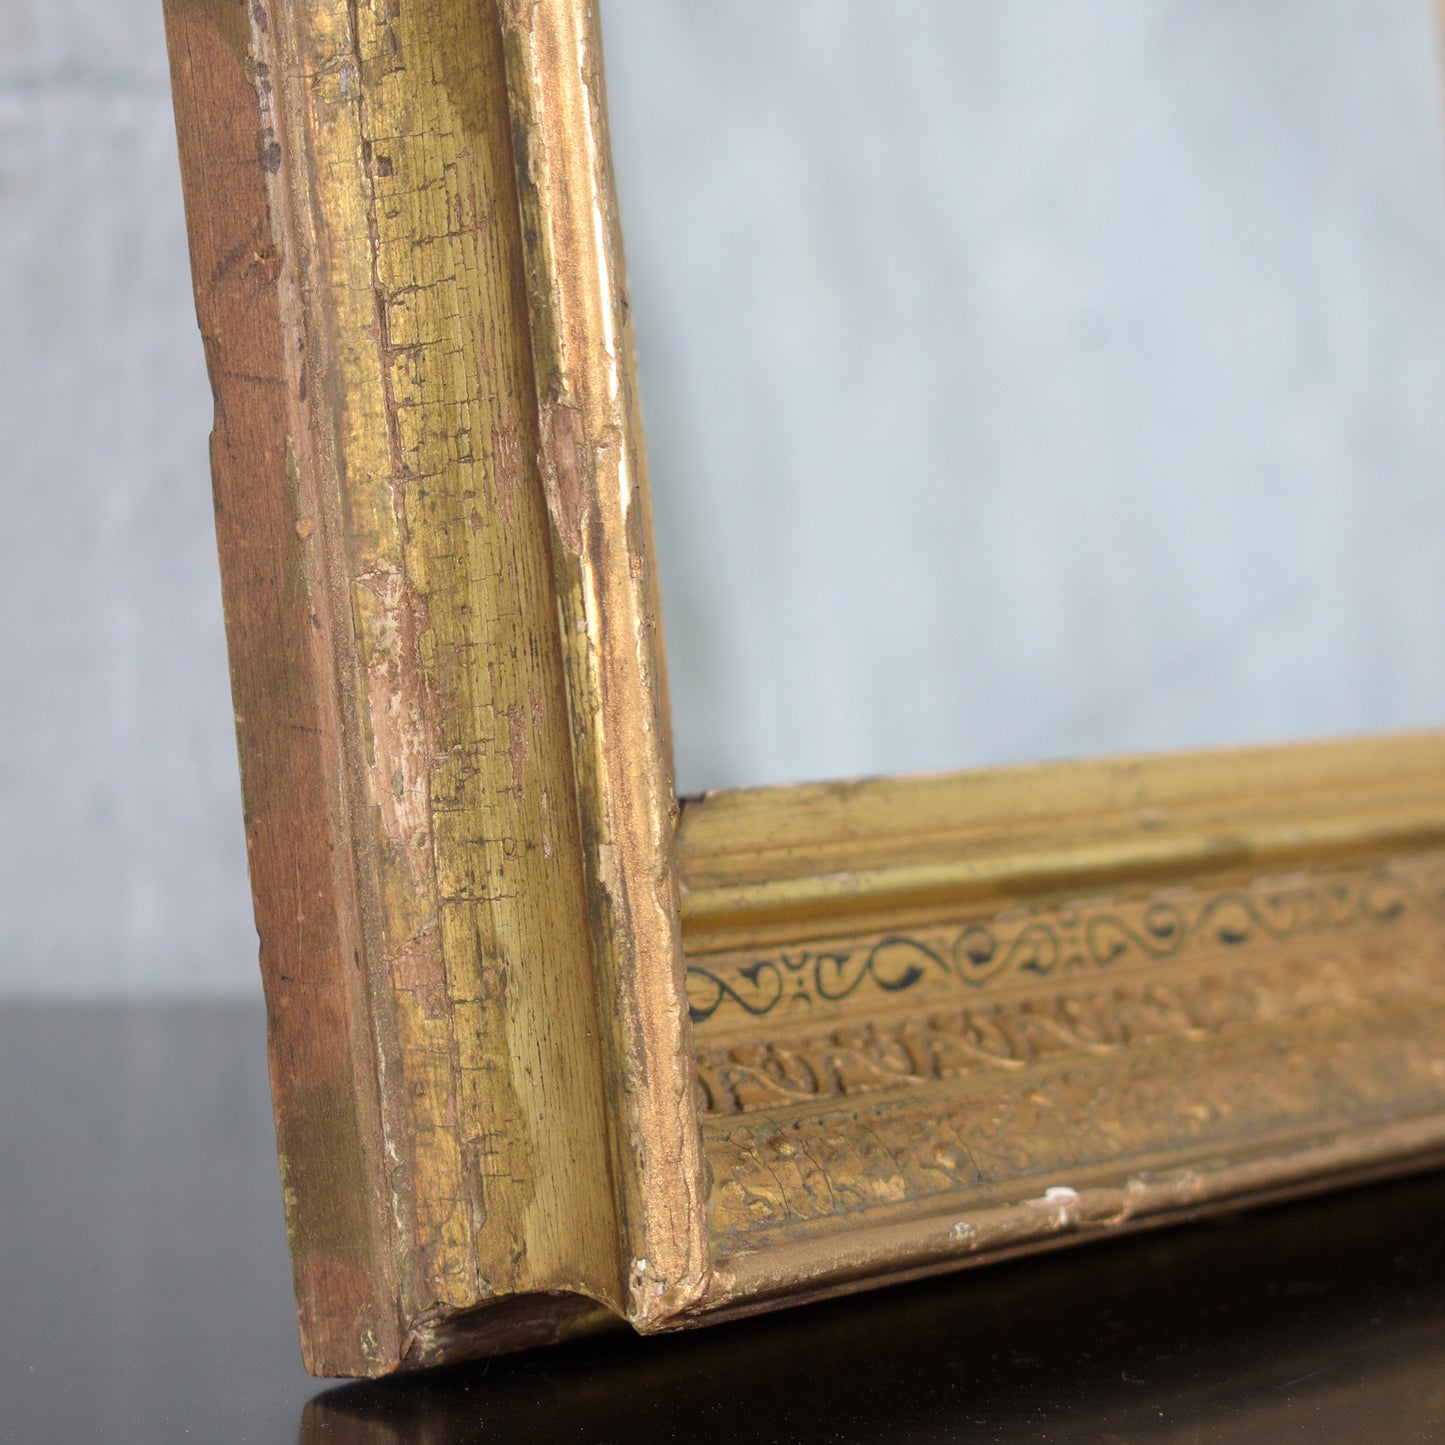 19th-Century French Antique Mirror: Restored Elegance with Water Gilt Finish